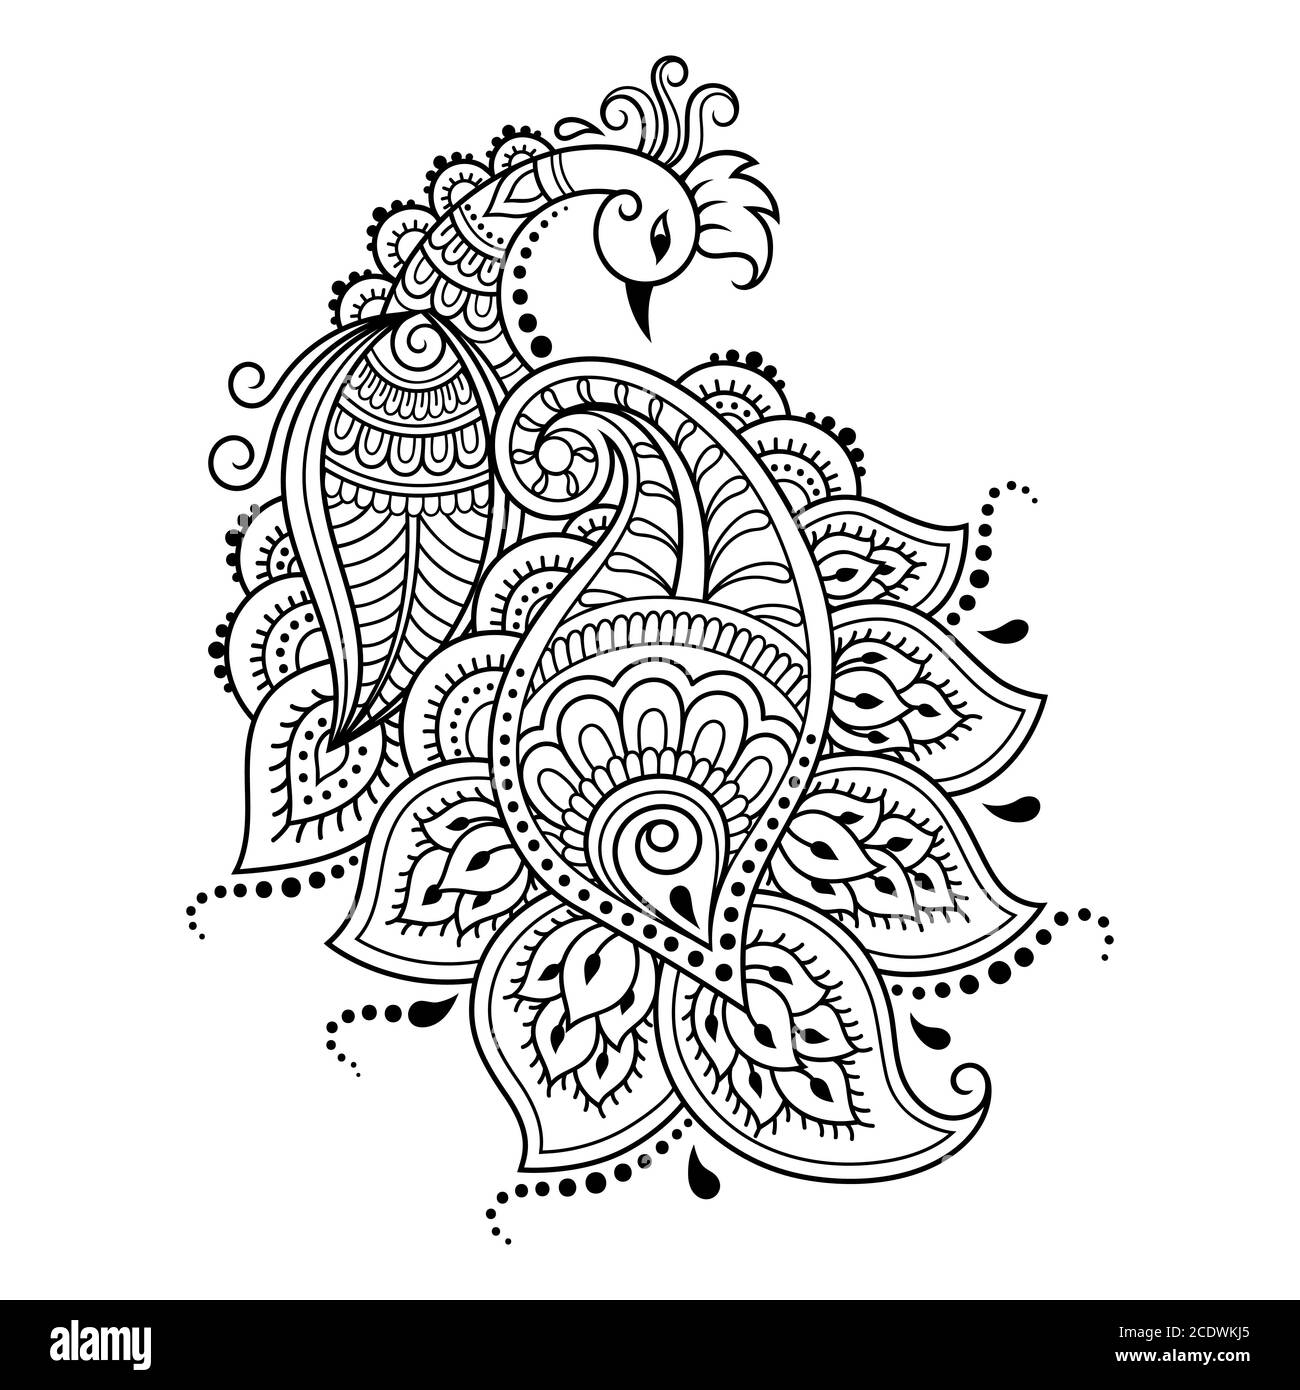 Mehndi flower pattern with peacock for Henna drawing and tattoo ...